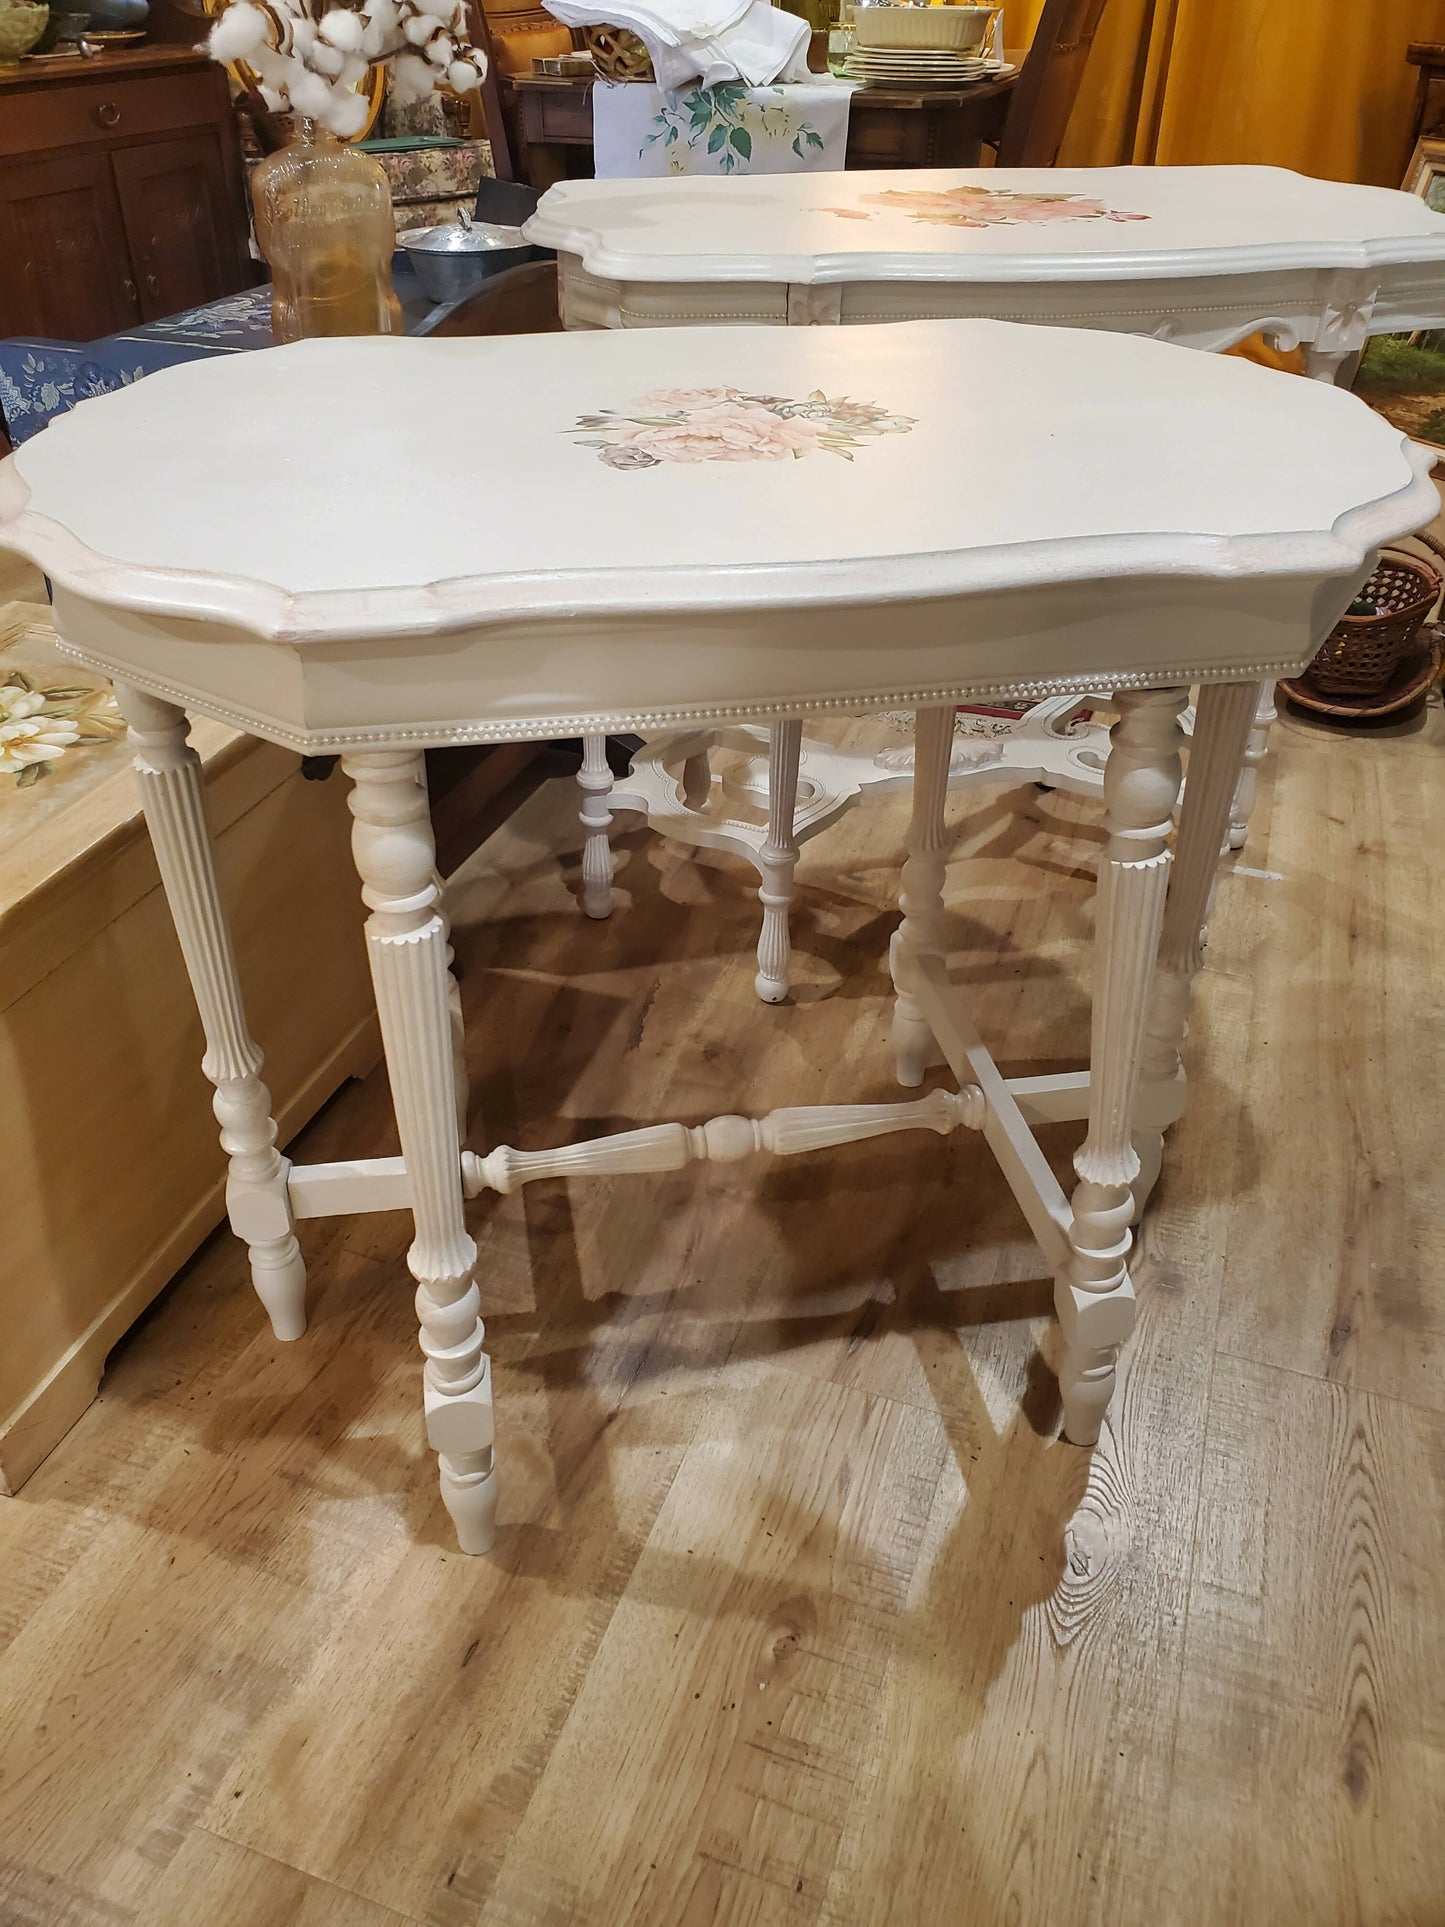 Painted Victorian table